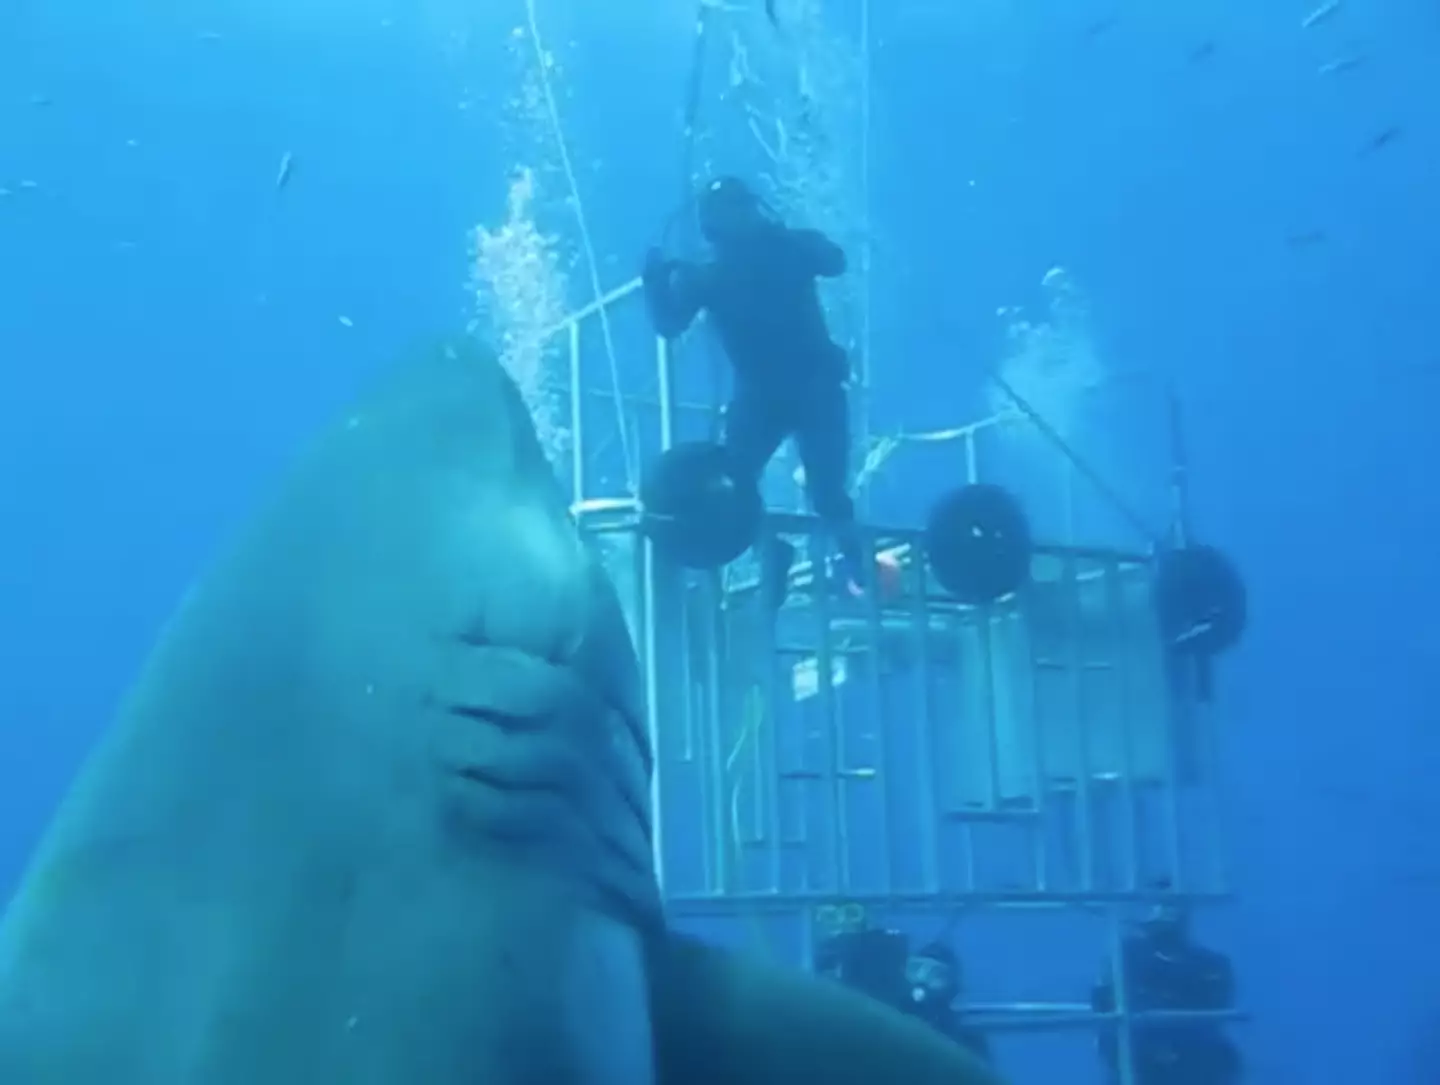 Here's the shark with some divers for scale.